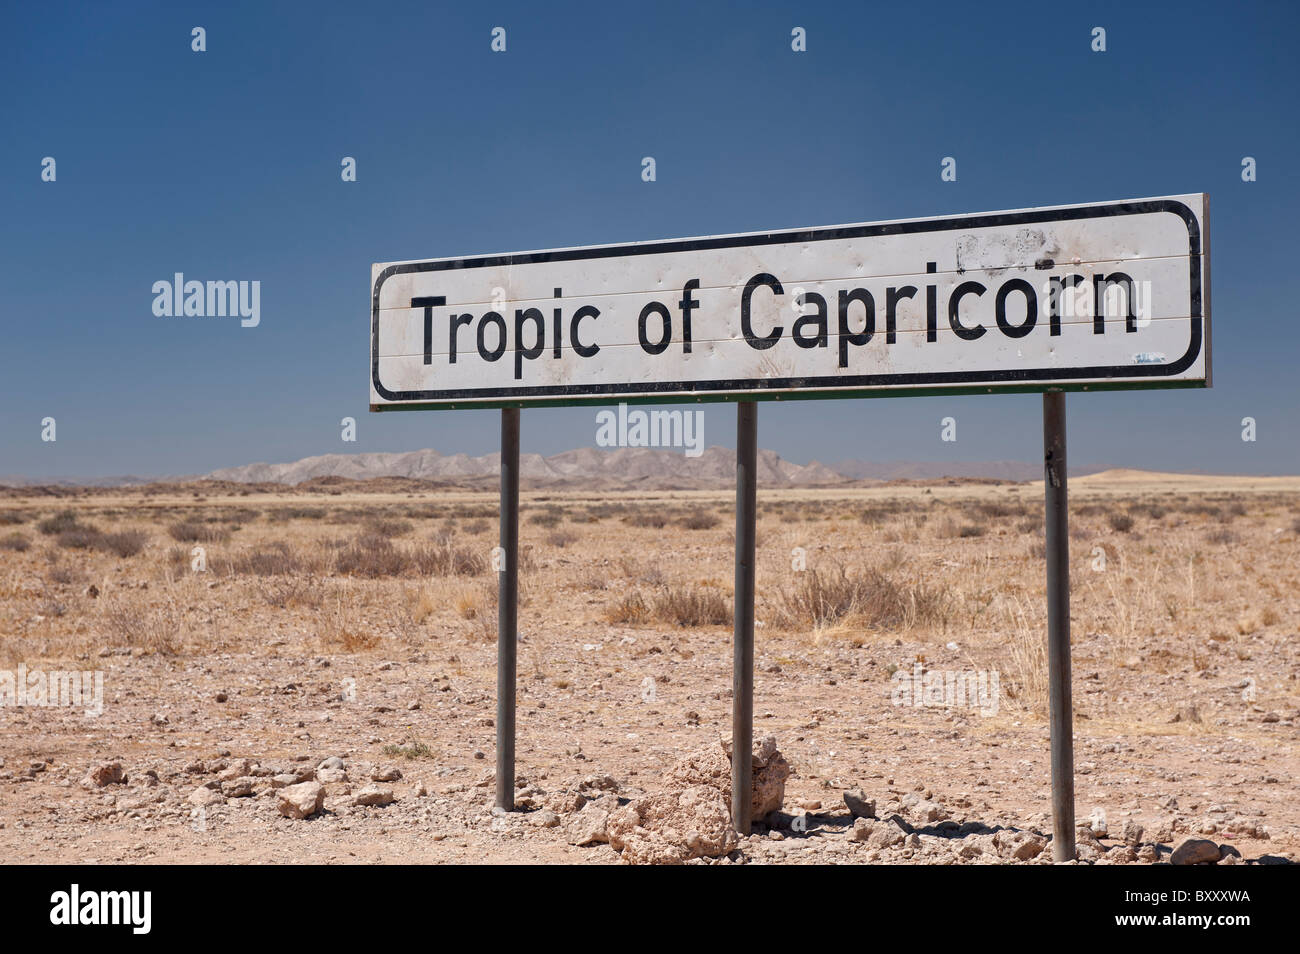 Tropic of Capricorn road sign marker, Gaub Pass north of Solitaire, Namibia, Southern Africa. Stock Photo